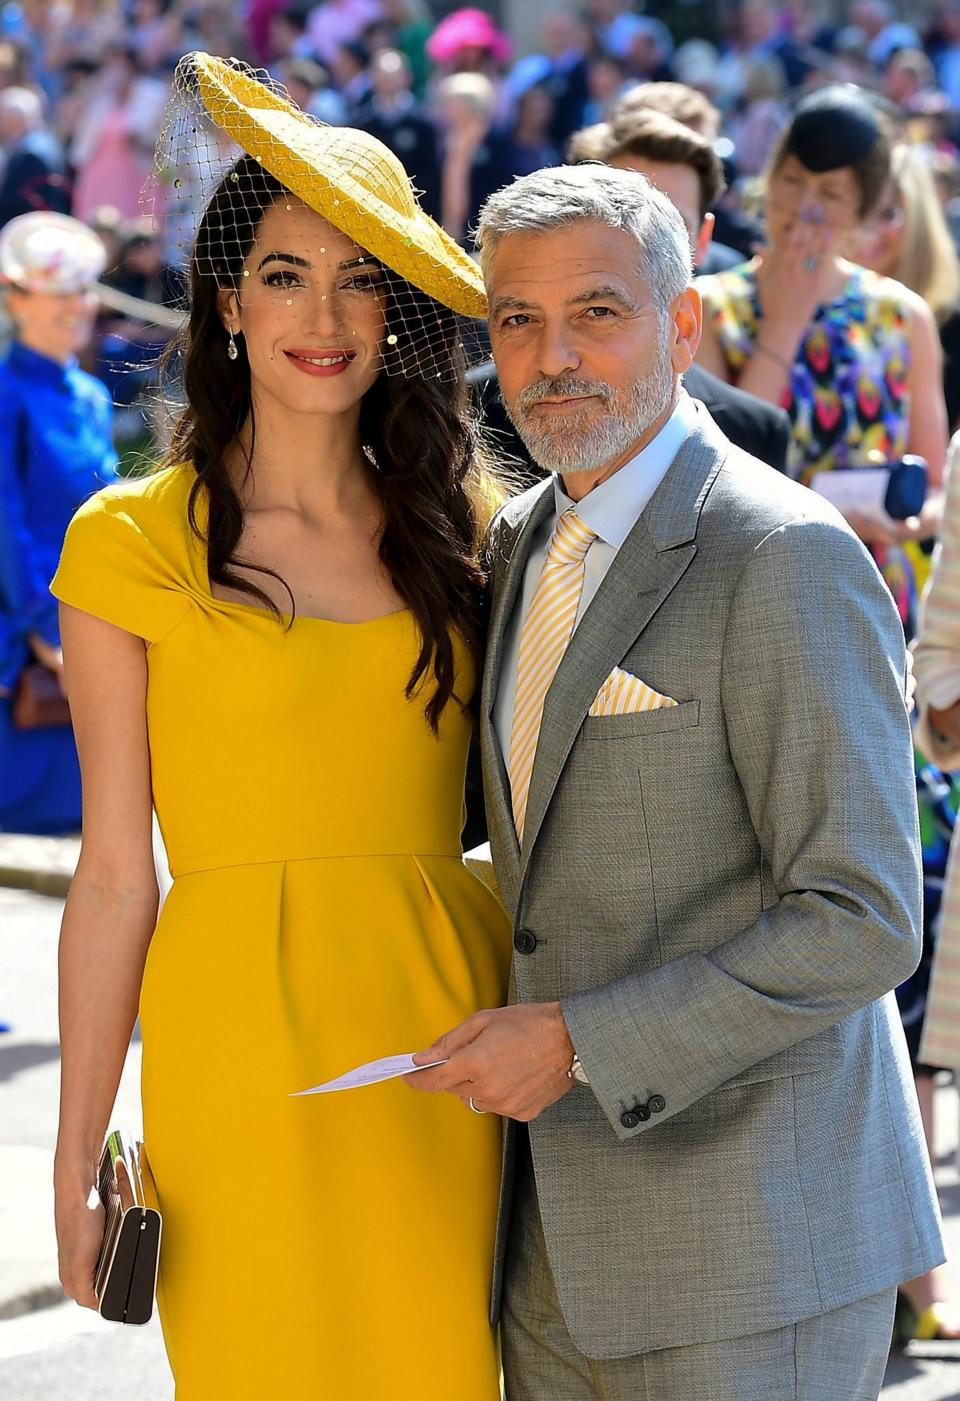 George and Amal Clooney arrive for the wedding ceremony of Prince Harry and Meghan Markle at St George's Chapel, Windsor Castle, in Windsor, on May 19, 2018.  (IAN WEST via Getty Images)